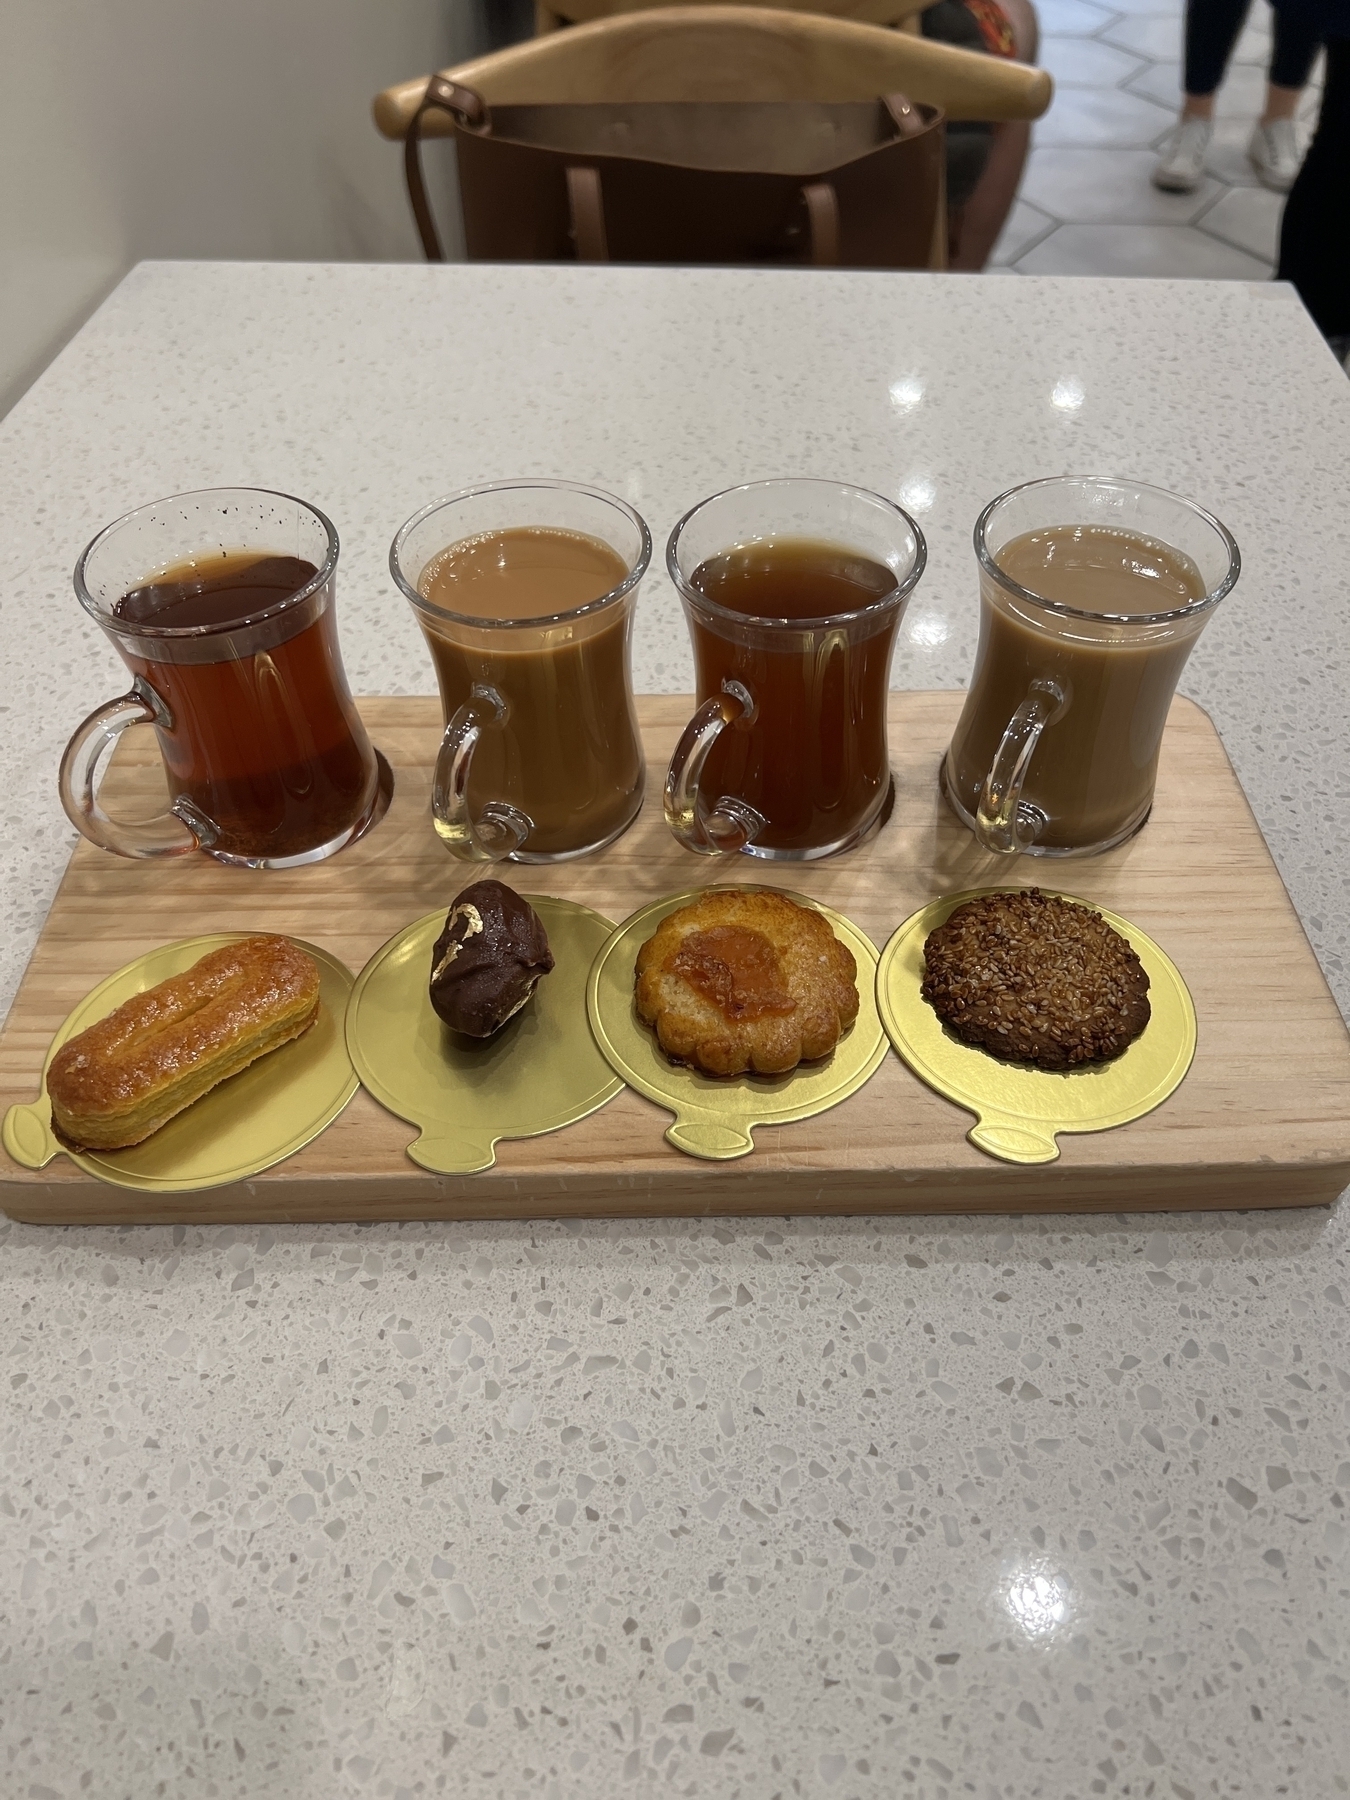 Assortment of beverages in glass cups. Pastries in foreground on wooden serving platter. 